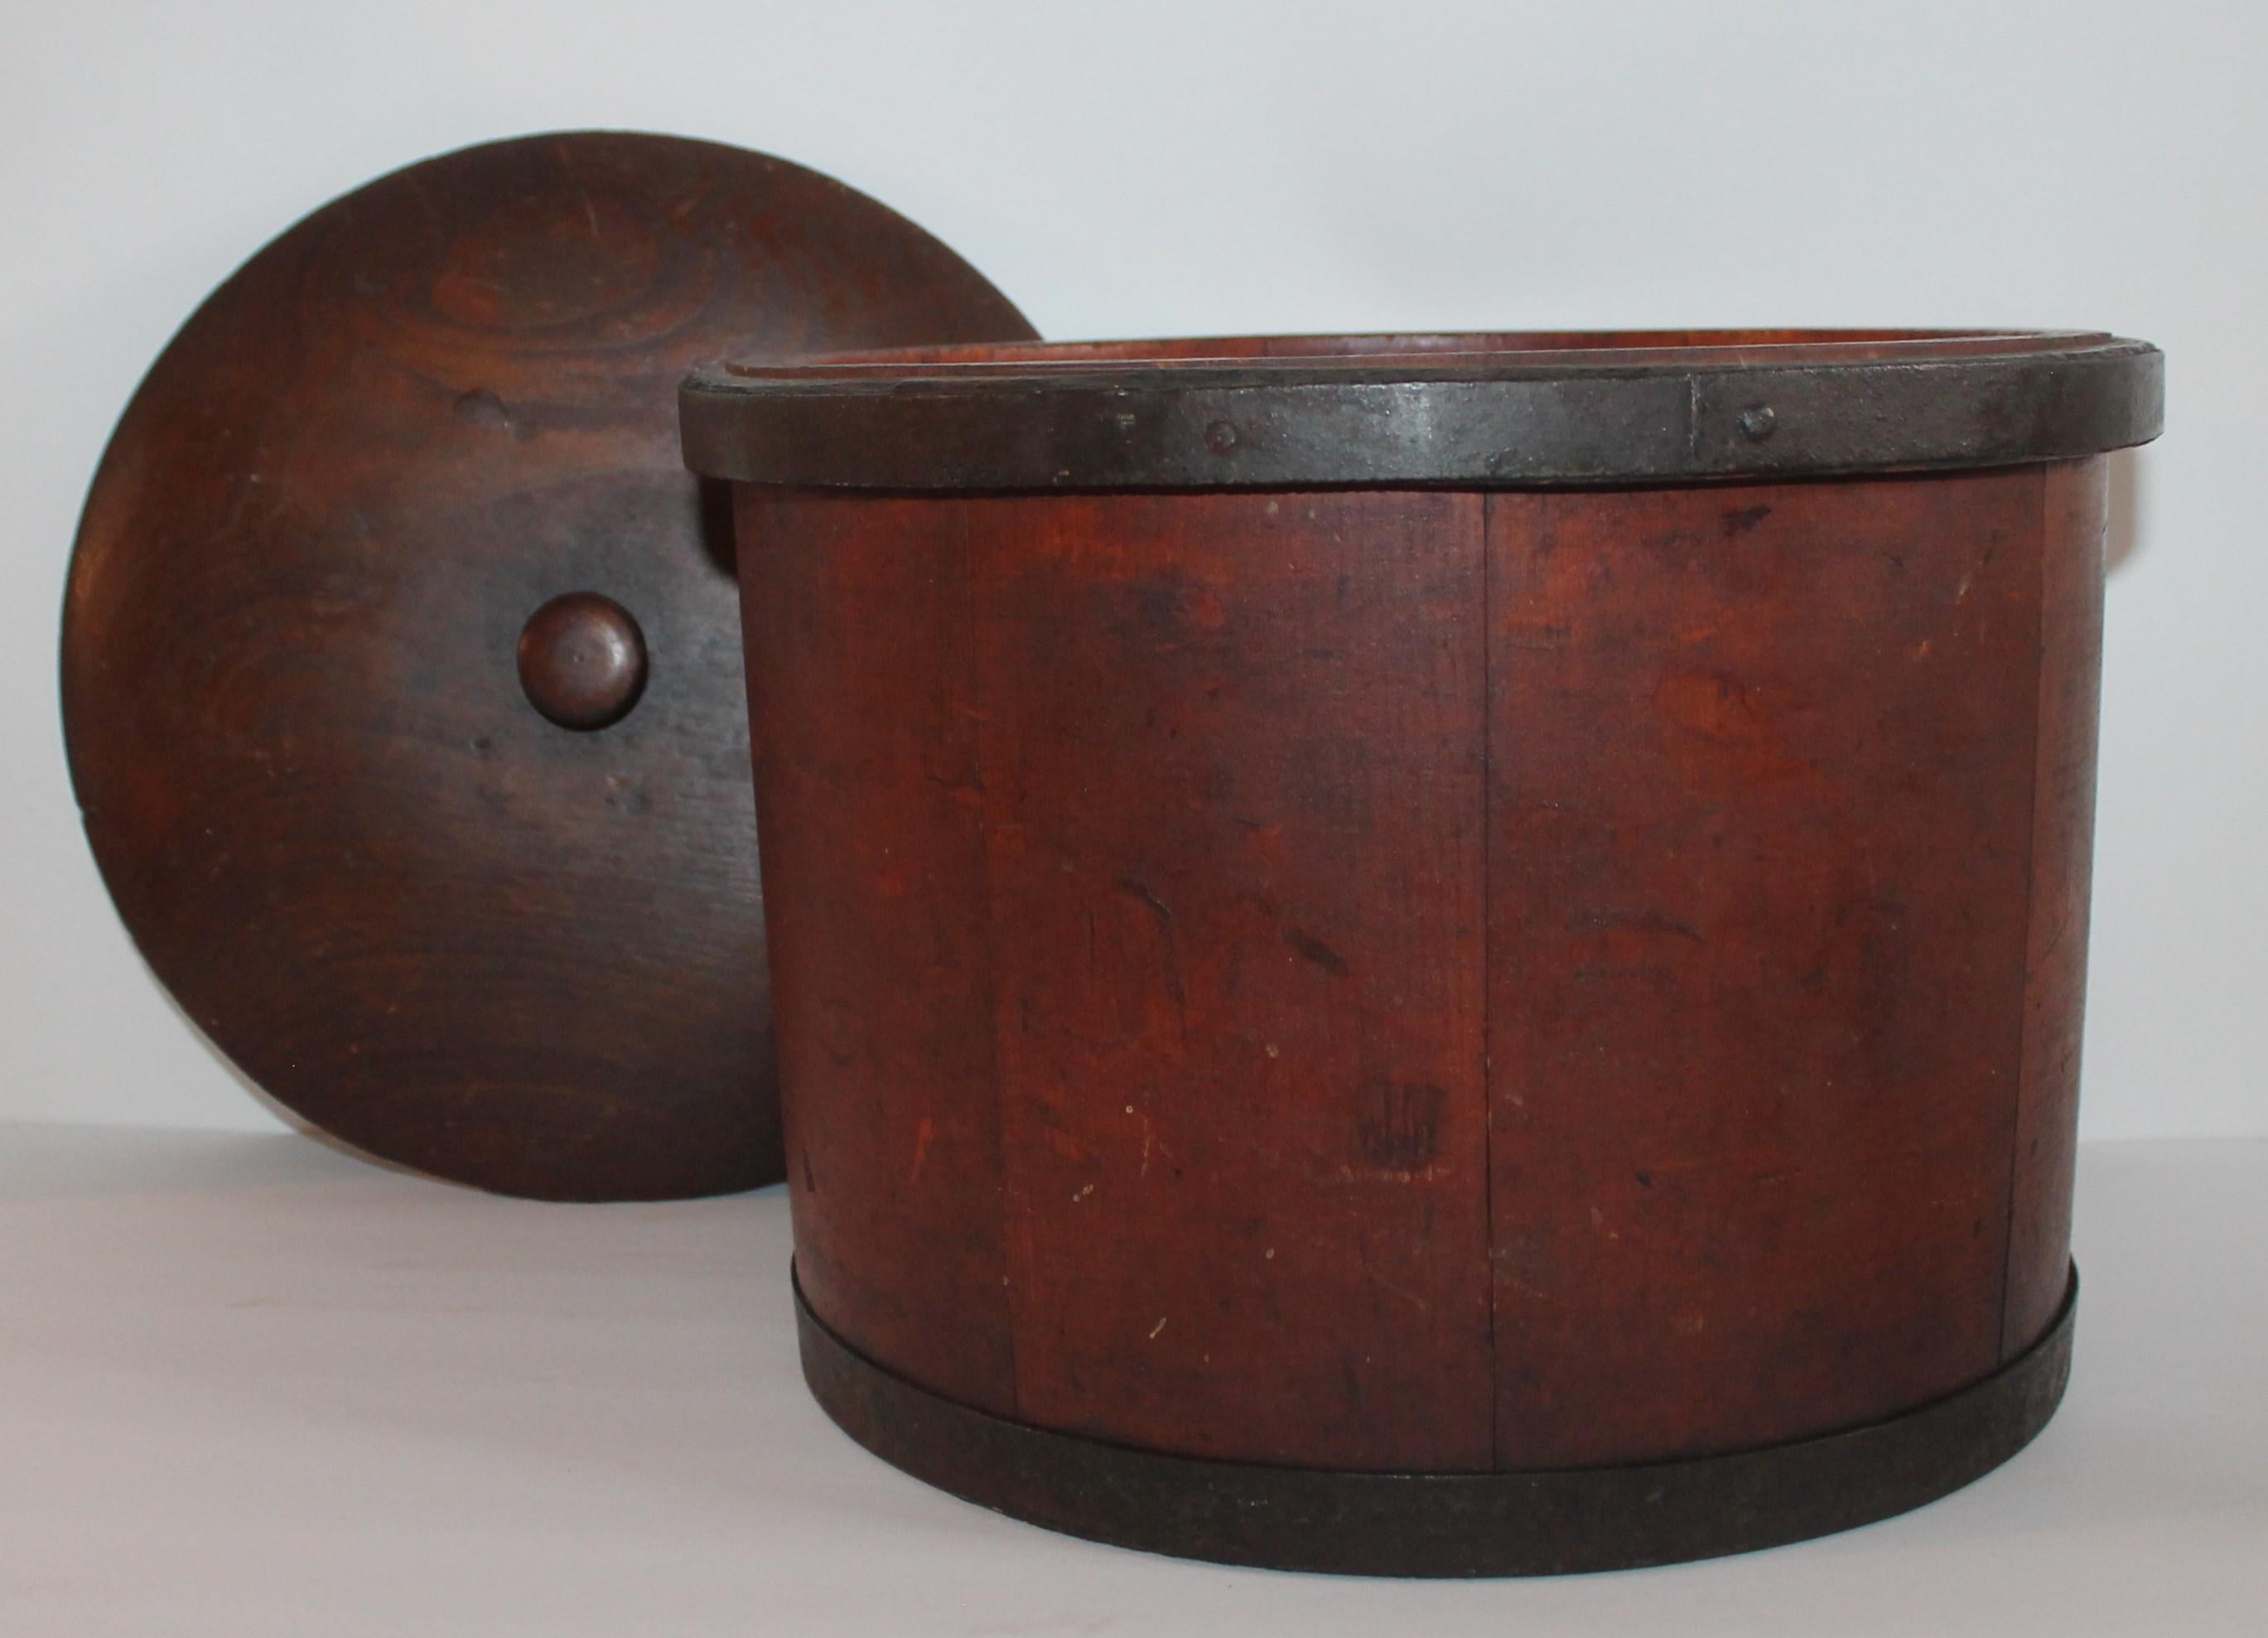 Hand-Crafted 19th Century Shaker Style Container with Lid